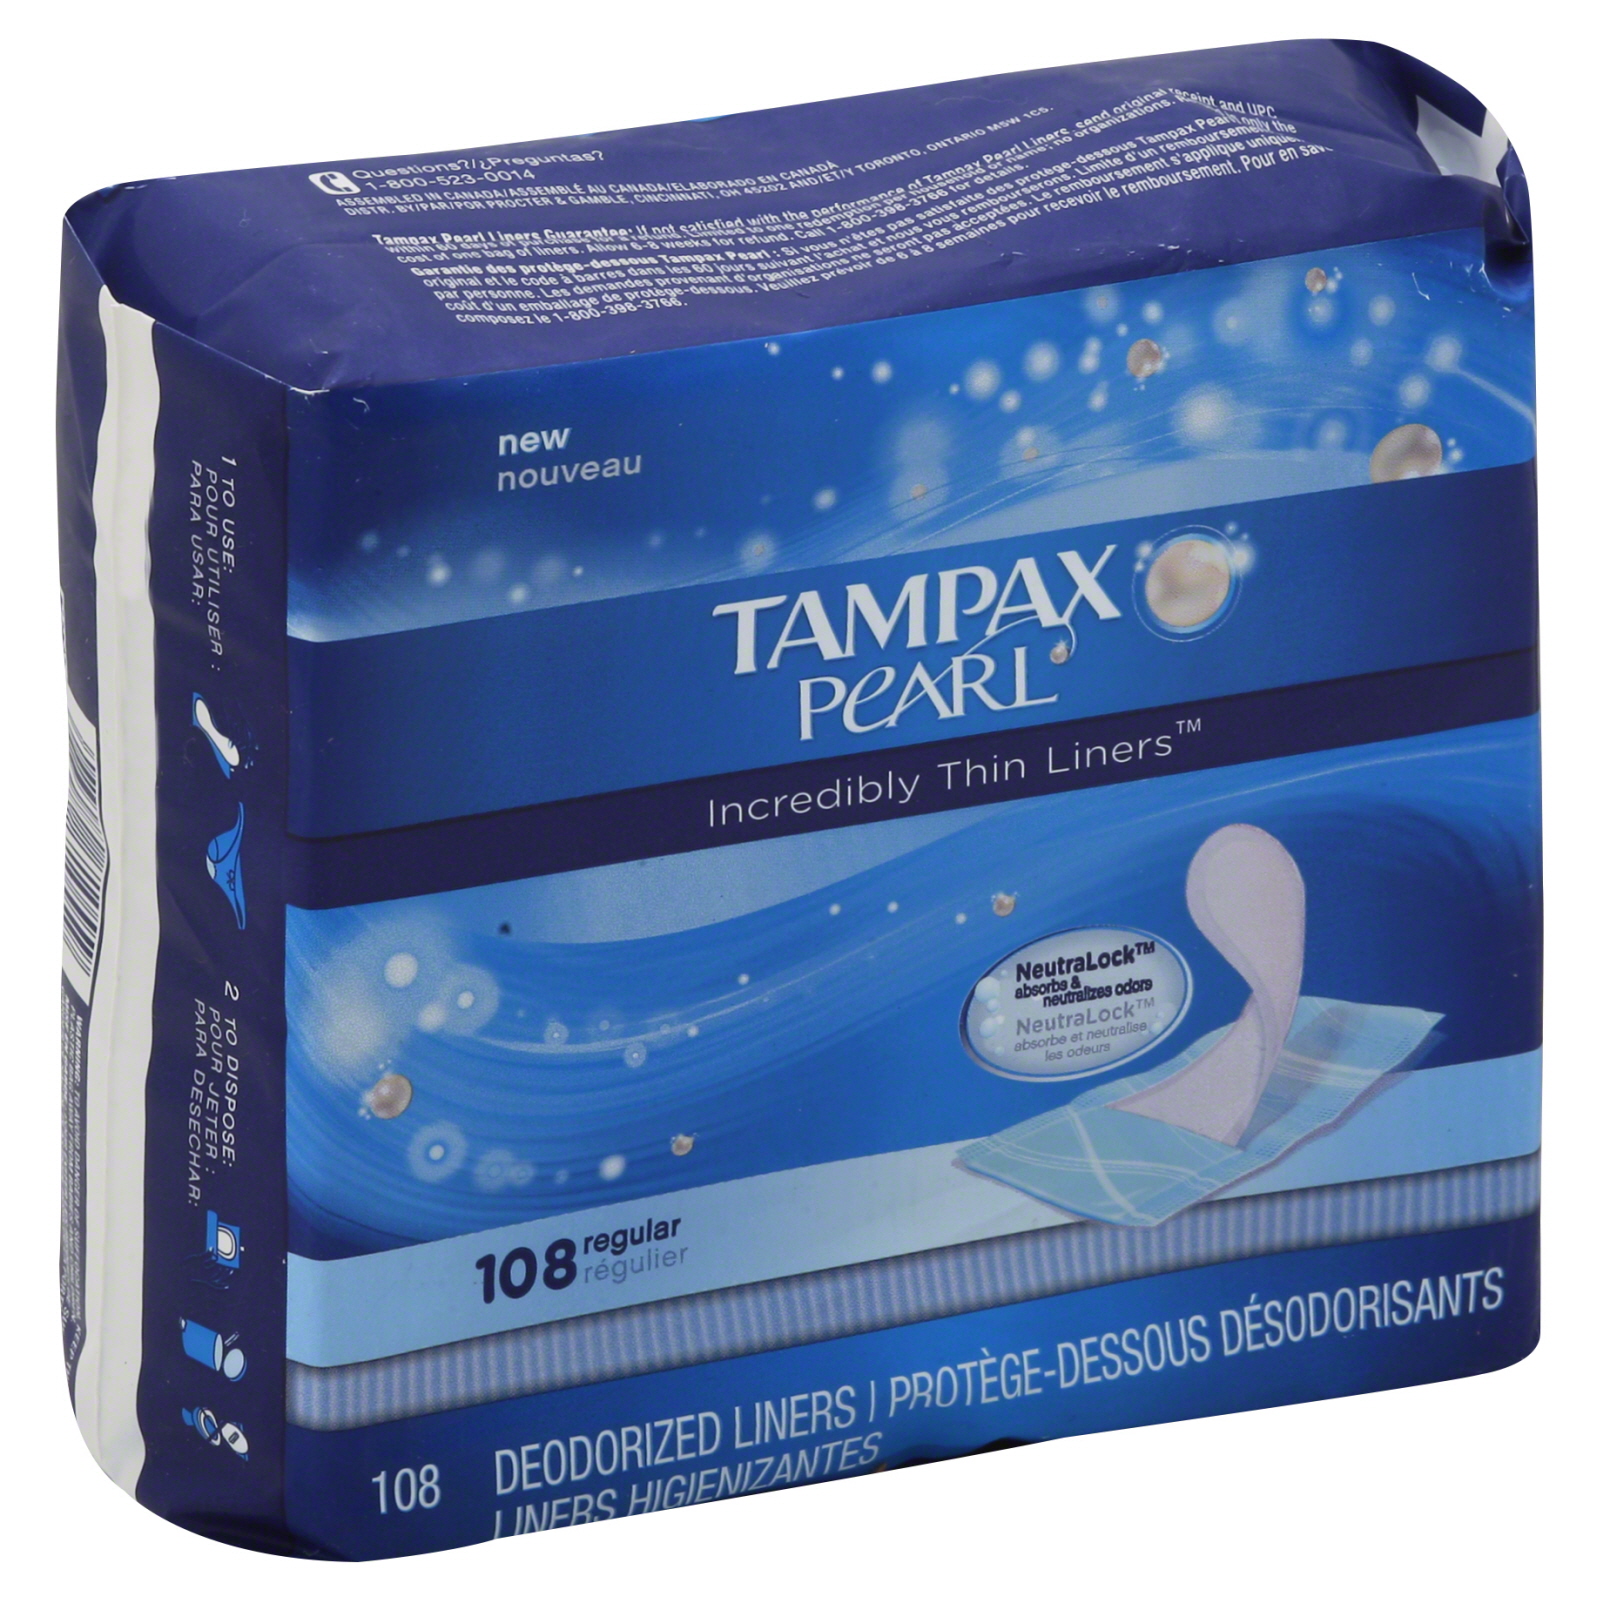 Tampax Pearl Incredibly Thin Liners, Regular, 108 tampons